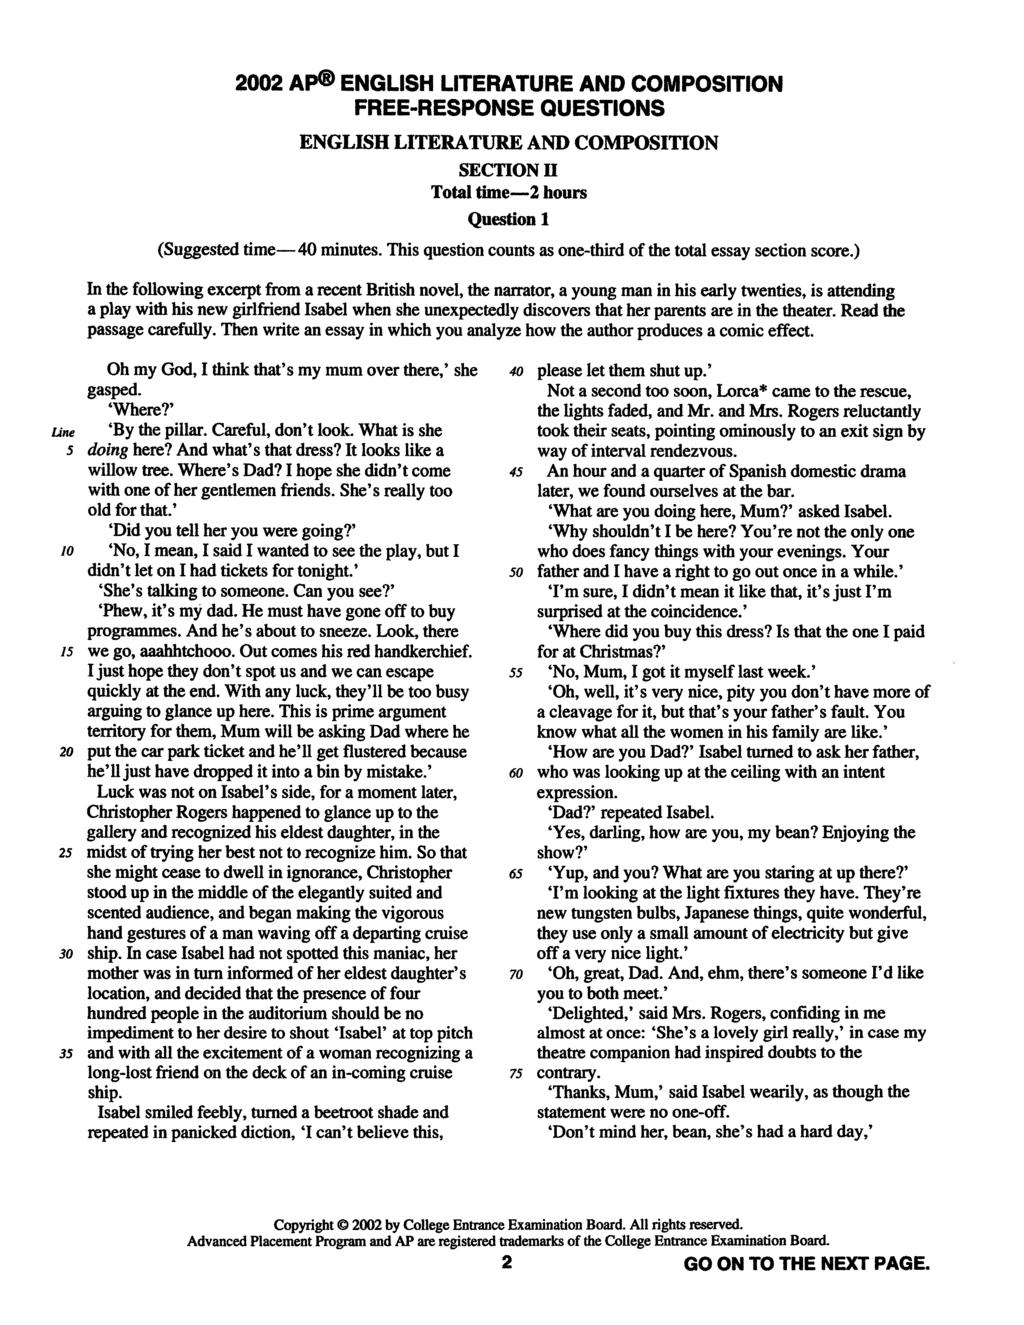 2002 AP ENGLISH LITERATURE AND COMPOSITION FREE-RESPONSE QUESTIONS ENGLISH LITERATURE AND COMPOSITION SECTION II Total time 2 hours Question 1 (Suggested time 40 minutes.